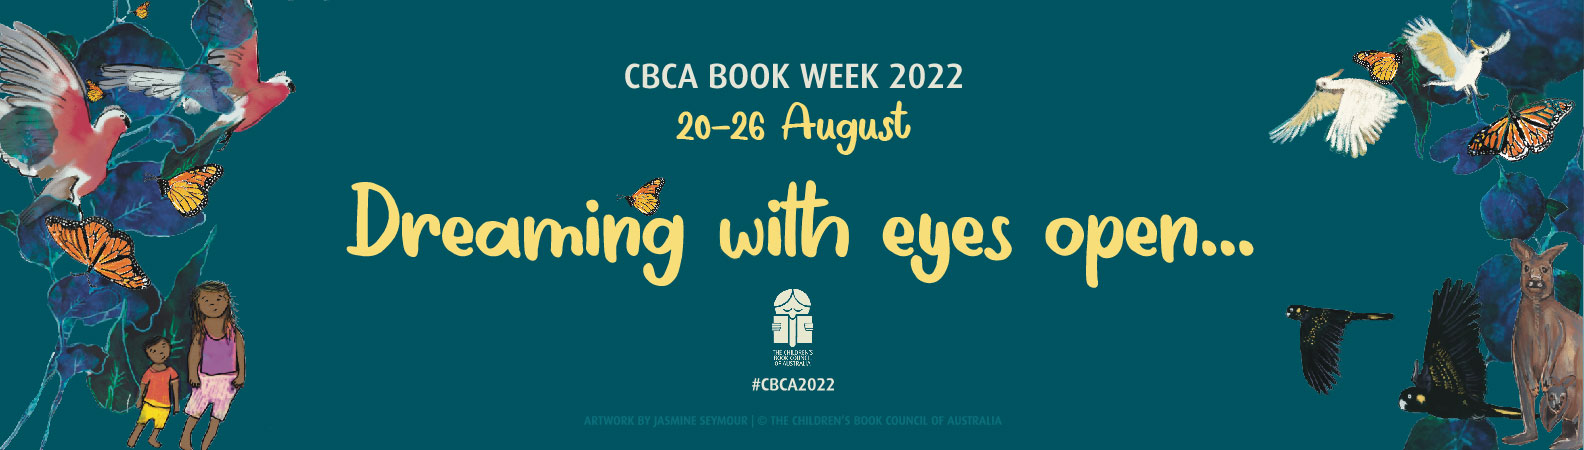 Book Week 2022 Design Competitions